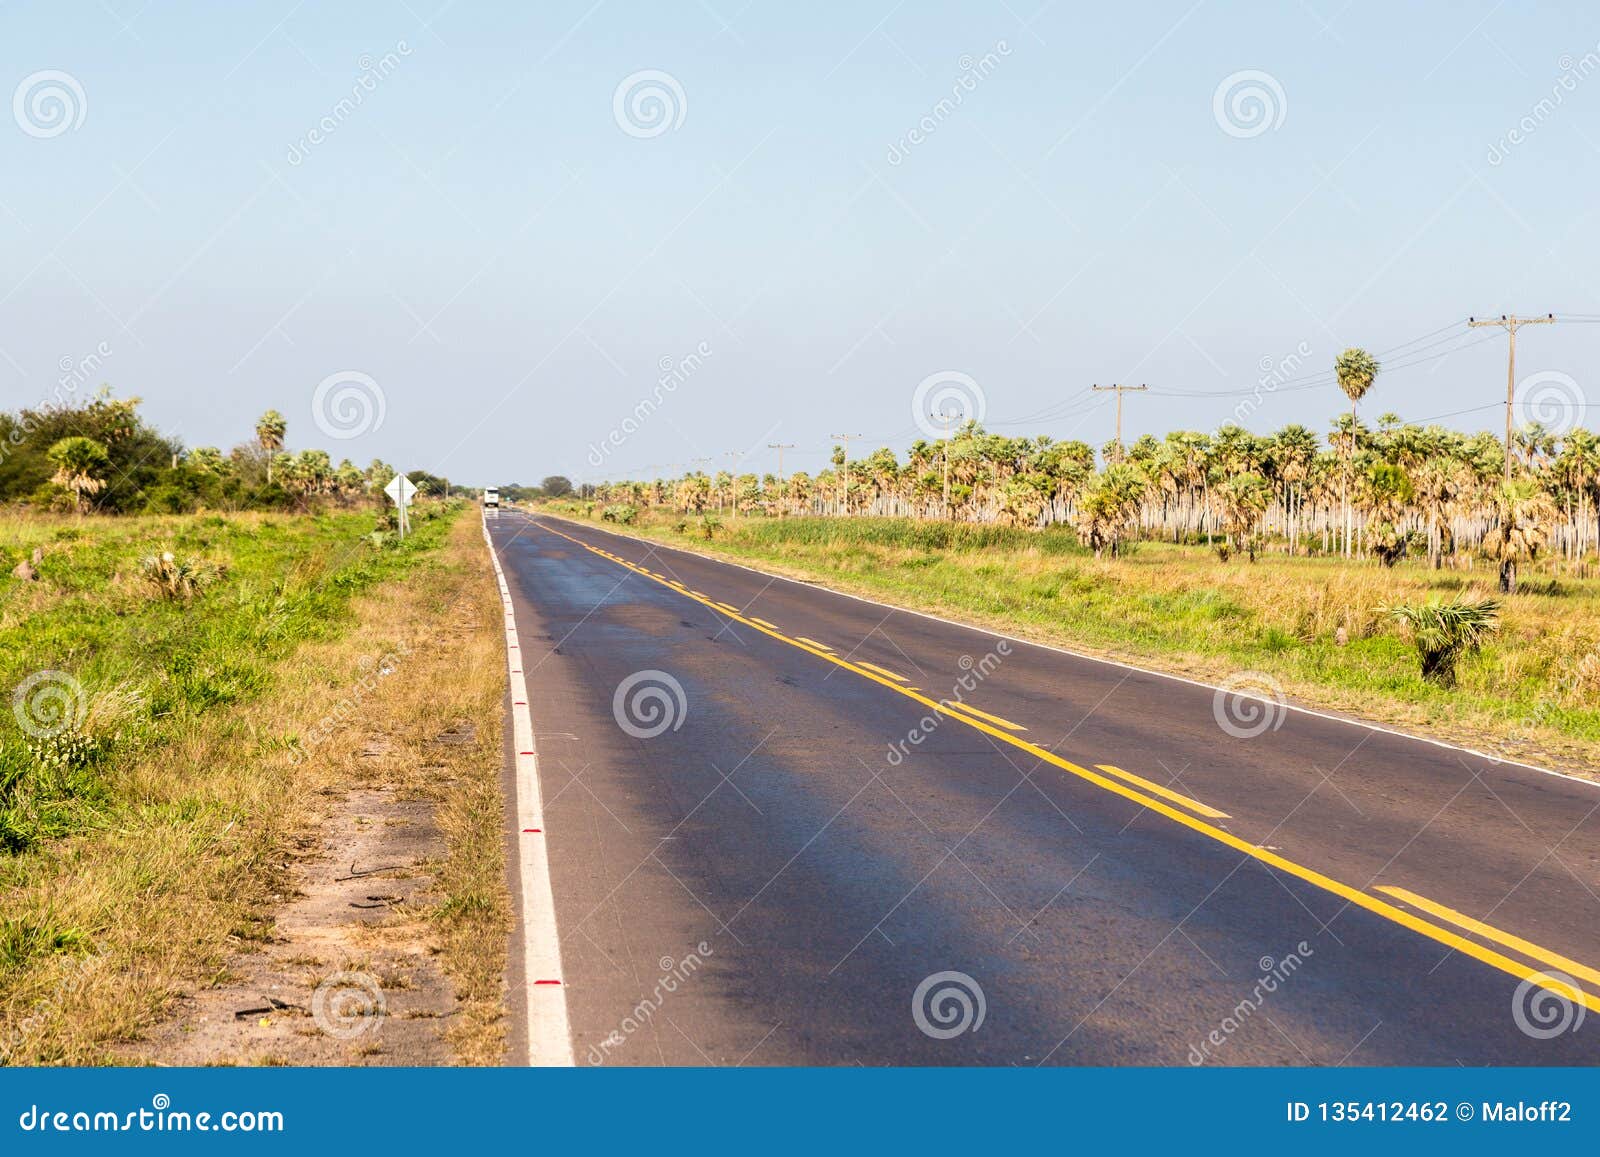 national route 9 highway runs through a palm forest and grasses of paraguayan chaco savannah, paraguay. ruta nacional numero 9 dr